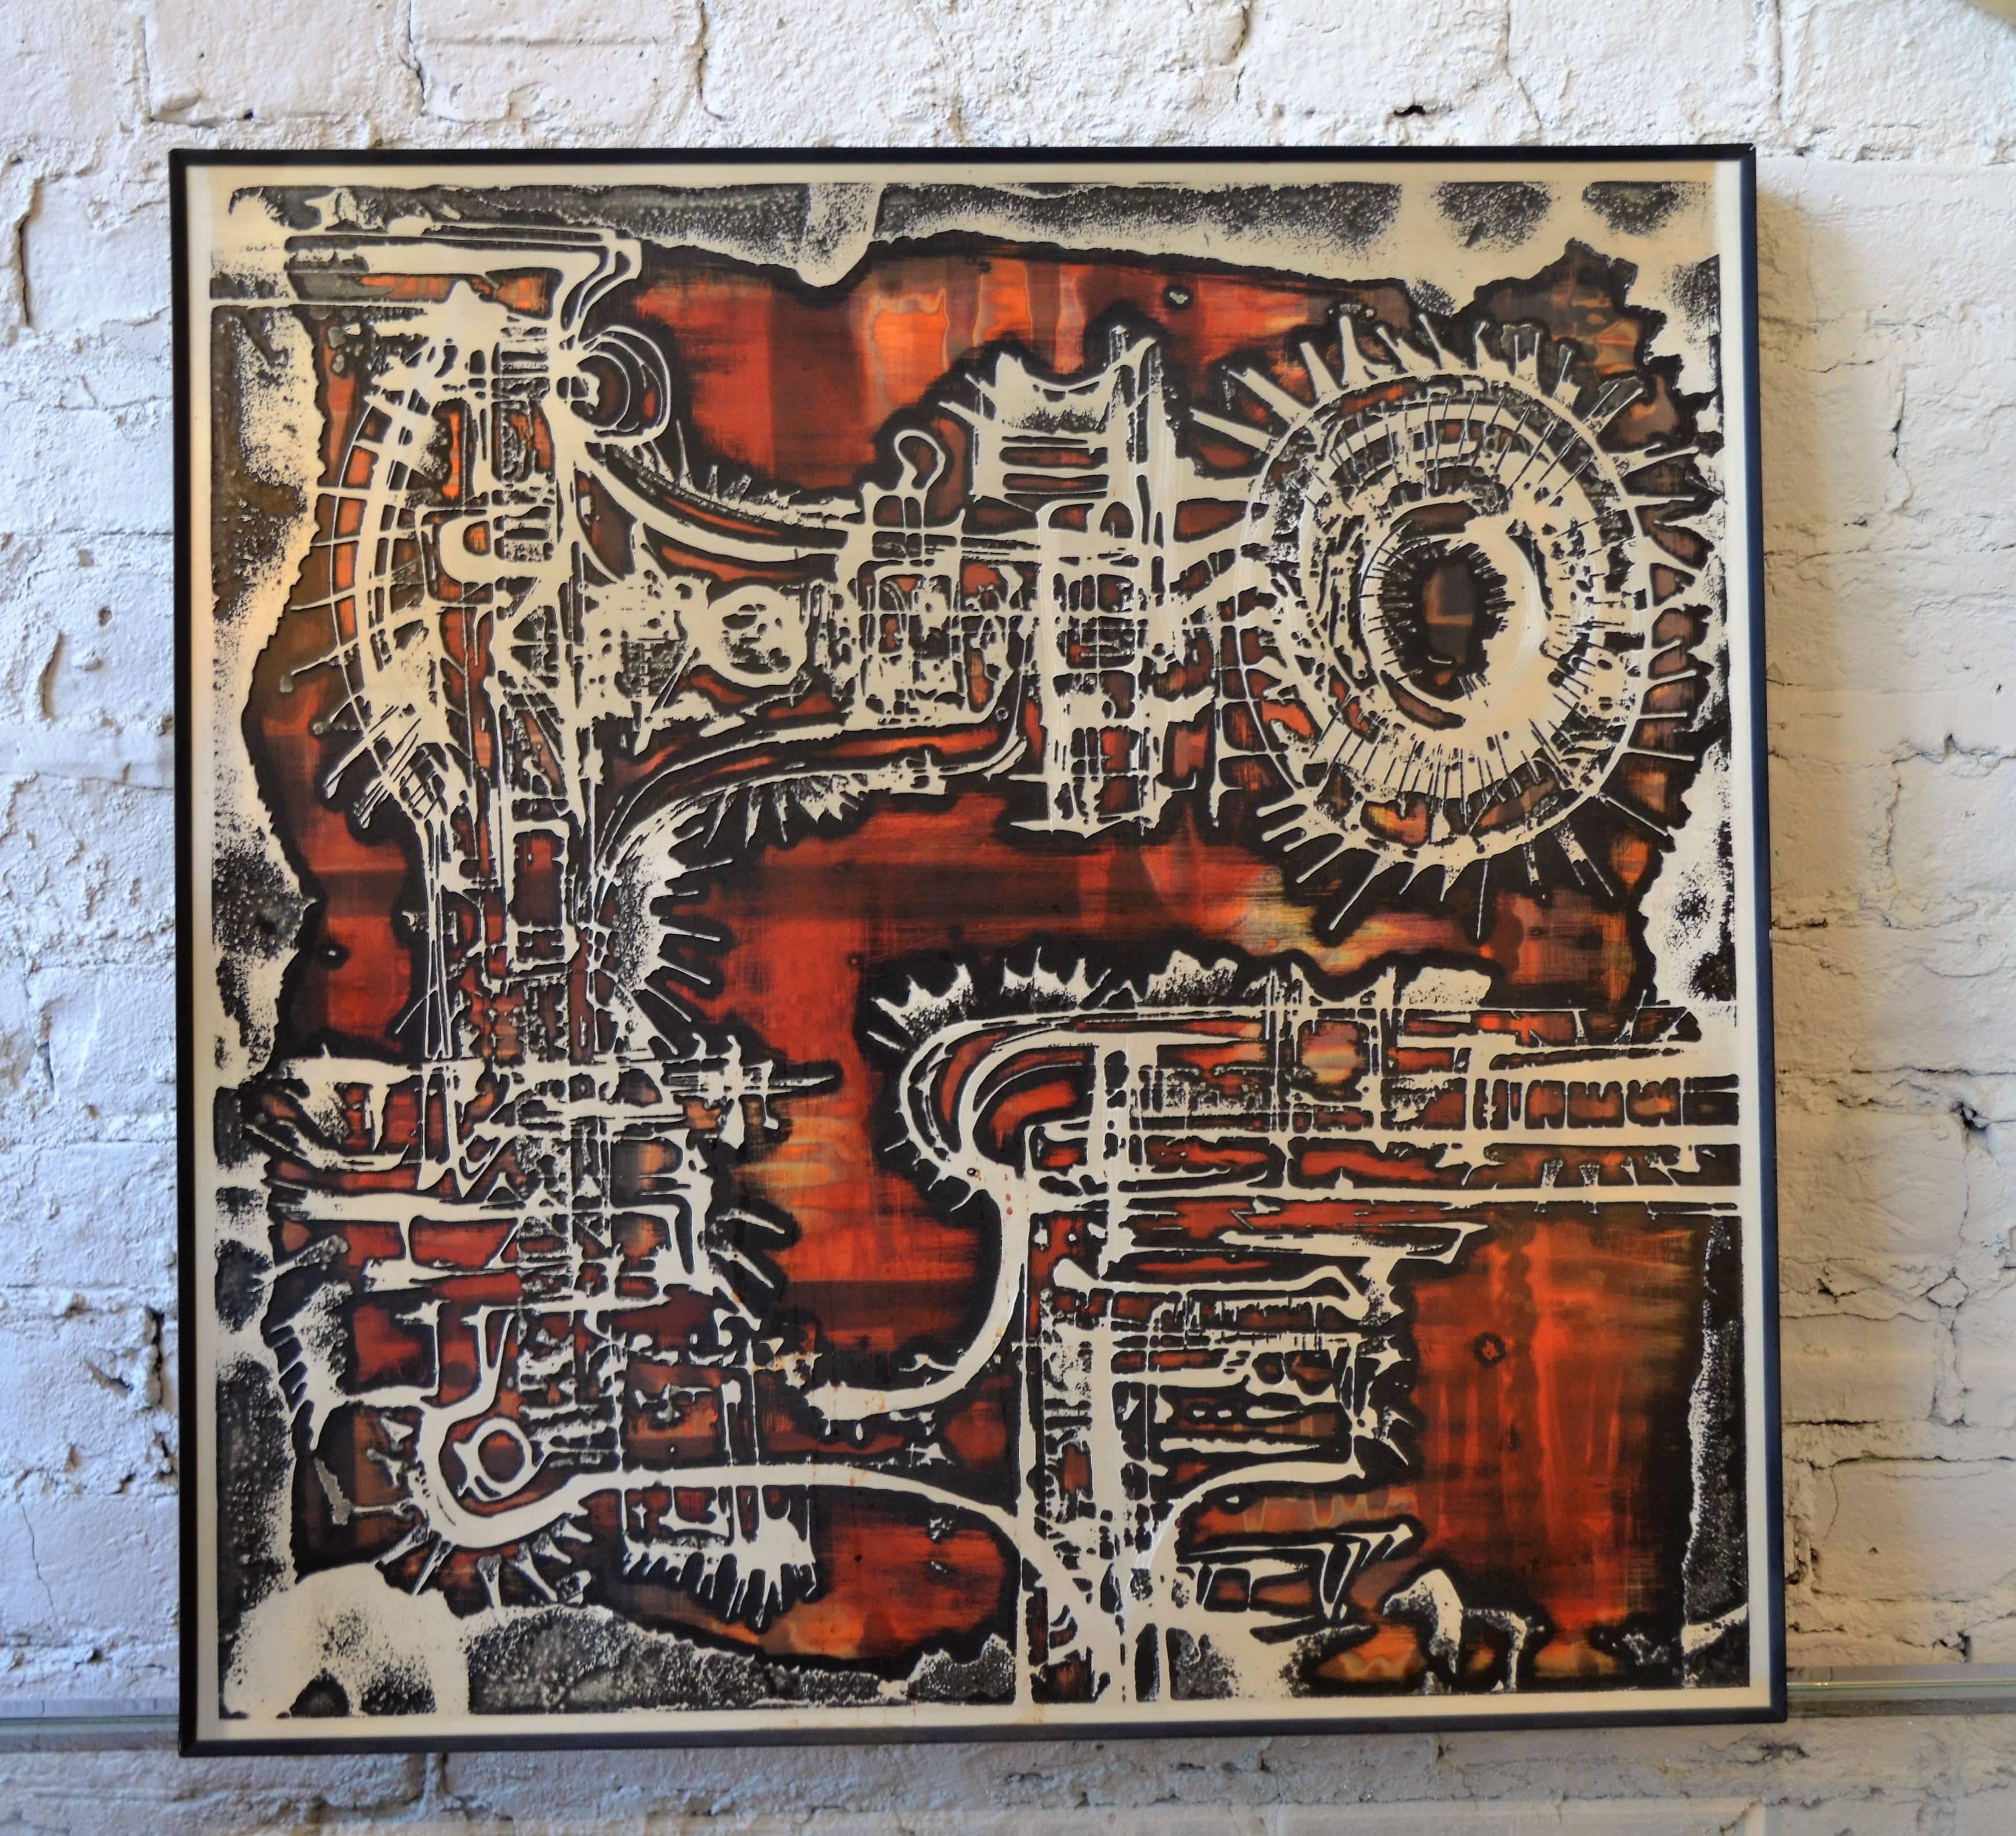 Rarely seen acid etched aluminum and brass wall plaque artwork by
noted Mastercraft artisan Bernhard Rohne. The silver red and black 
color combination is unusual. Signed Bernhard Rohne, 1972.